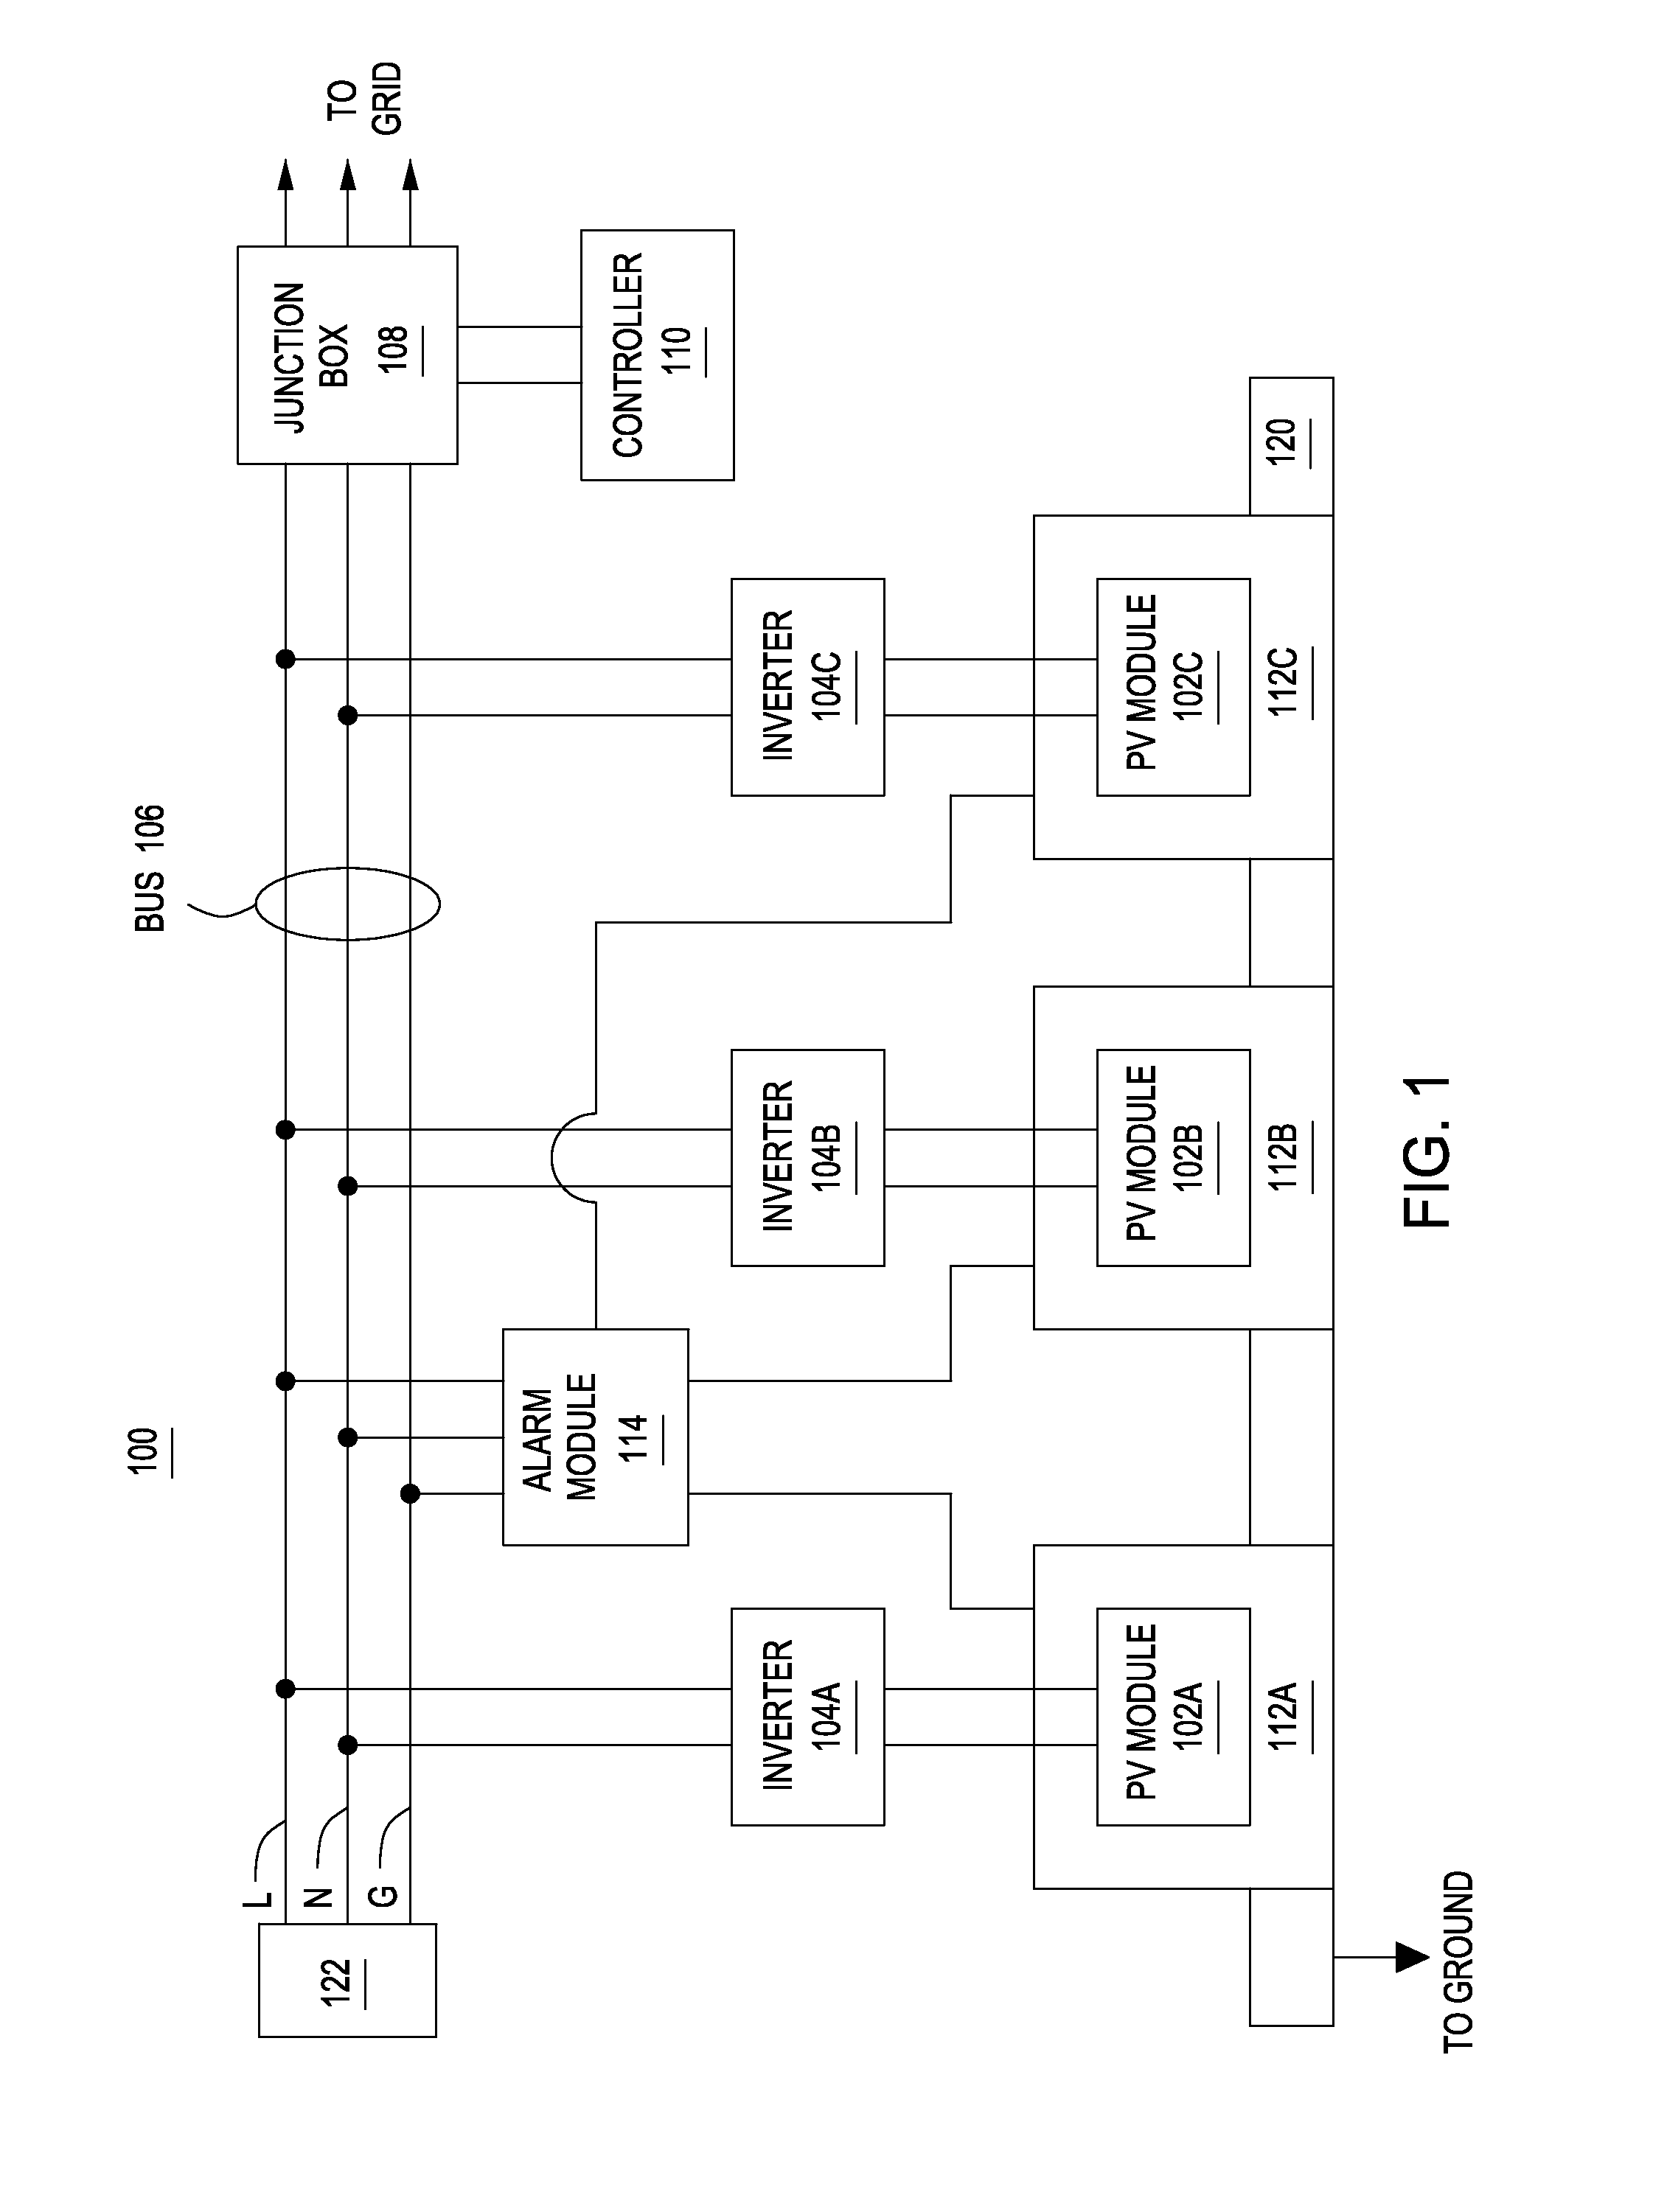 Method and apparatus for indicating a disconnection within a distributed generator